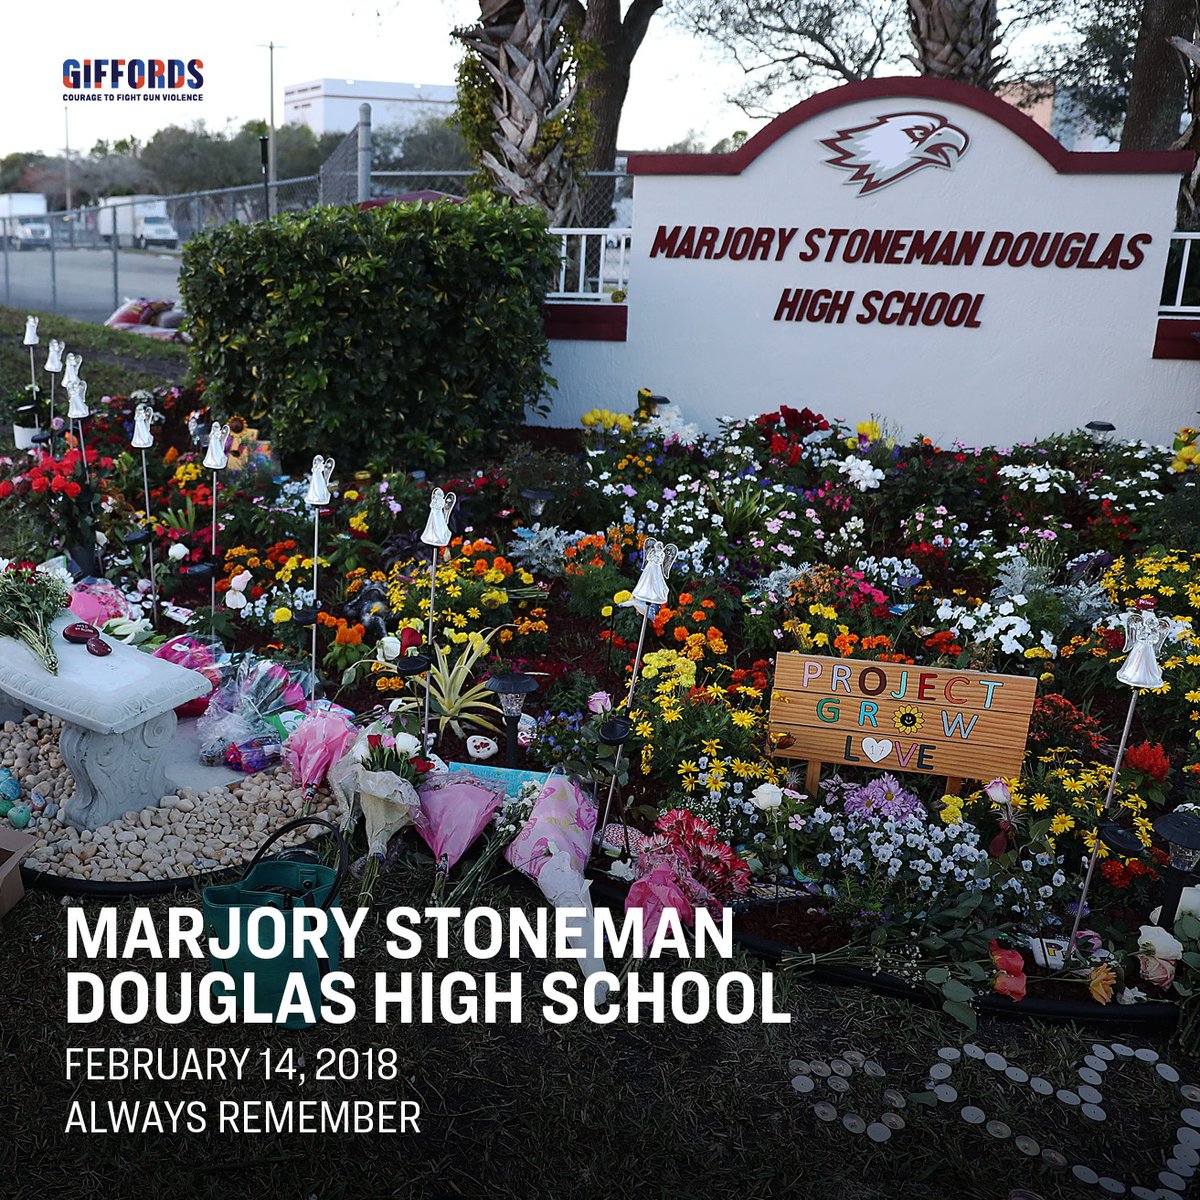 Six years ago today, 17 people were killed and 17 were injured at Marjory Stoneman Douglas High School. Since then, through the fierce advocacy of our movement, we've made unprecedented progress. Today, we remember the #Parkland17 and continue working to honor them with action.